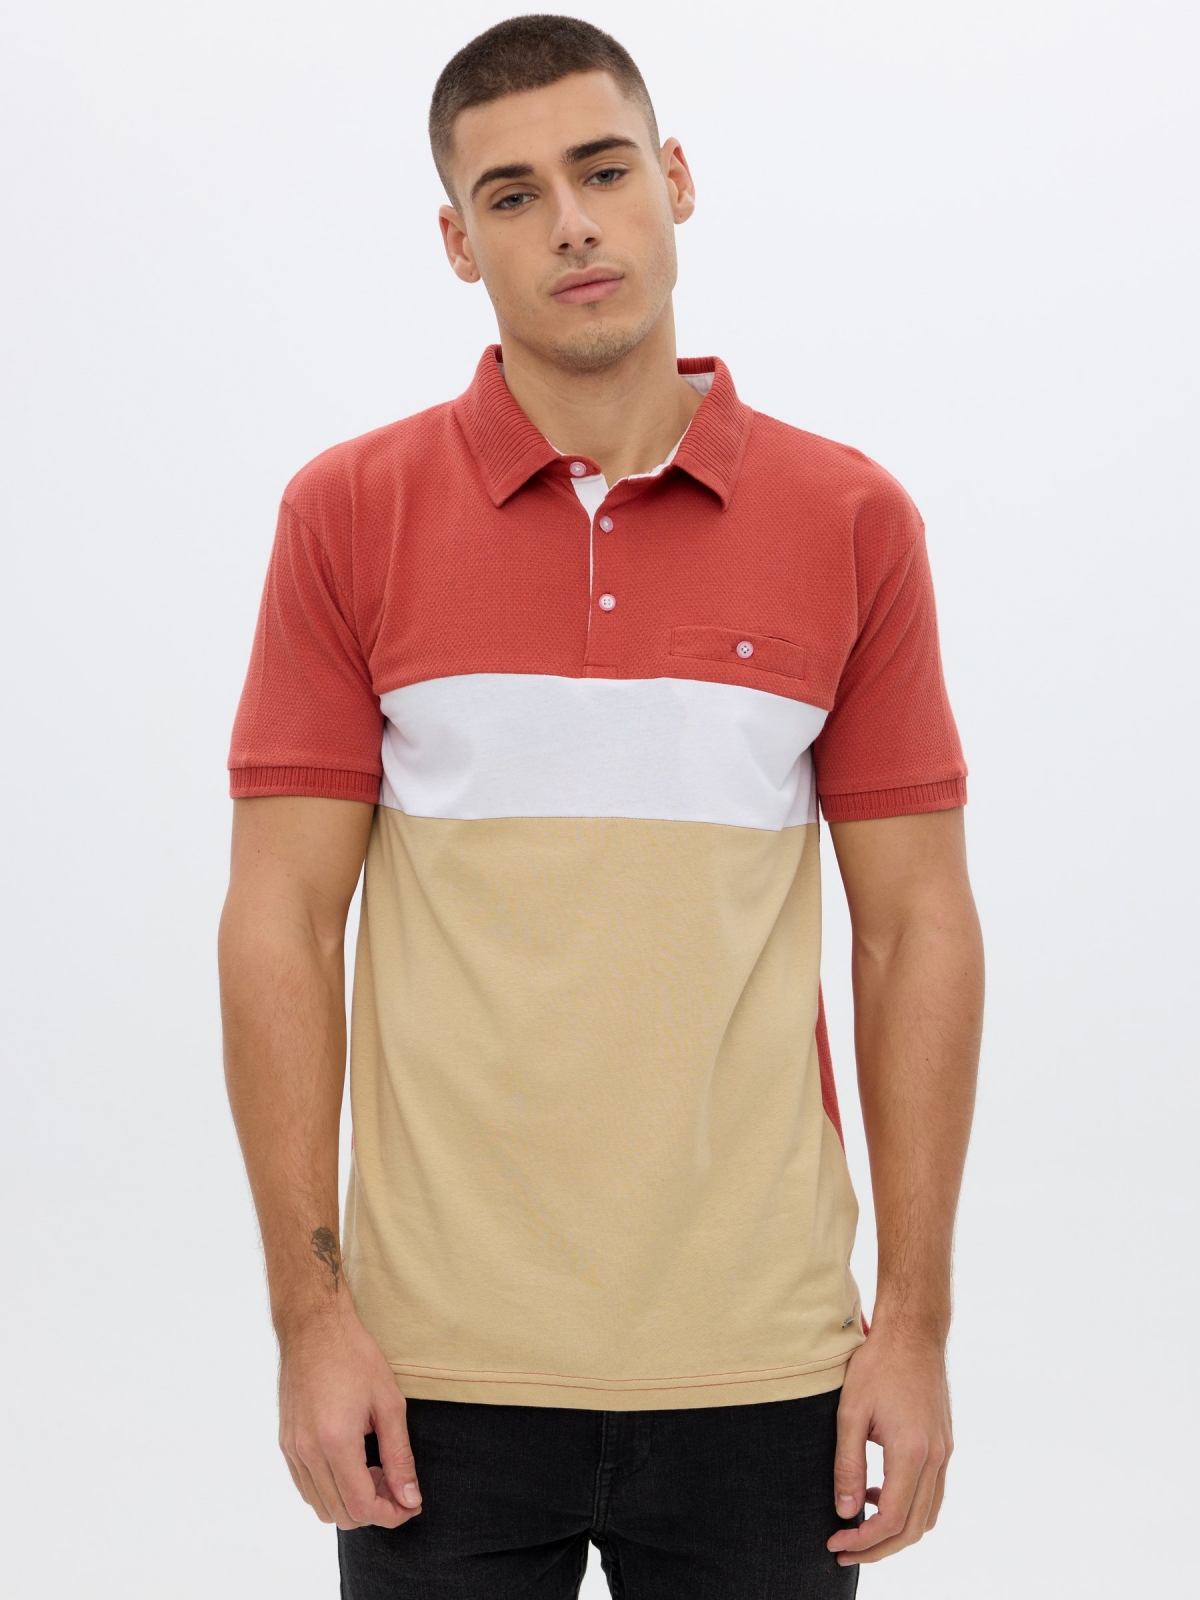 Woven striped polo shirt brick red middle front view